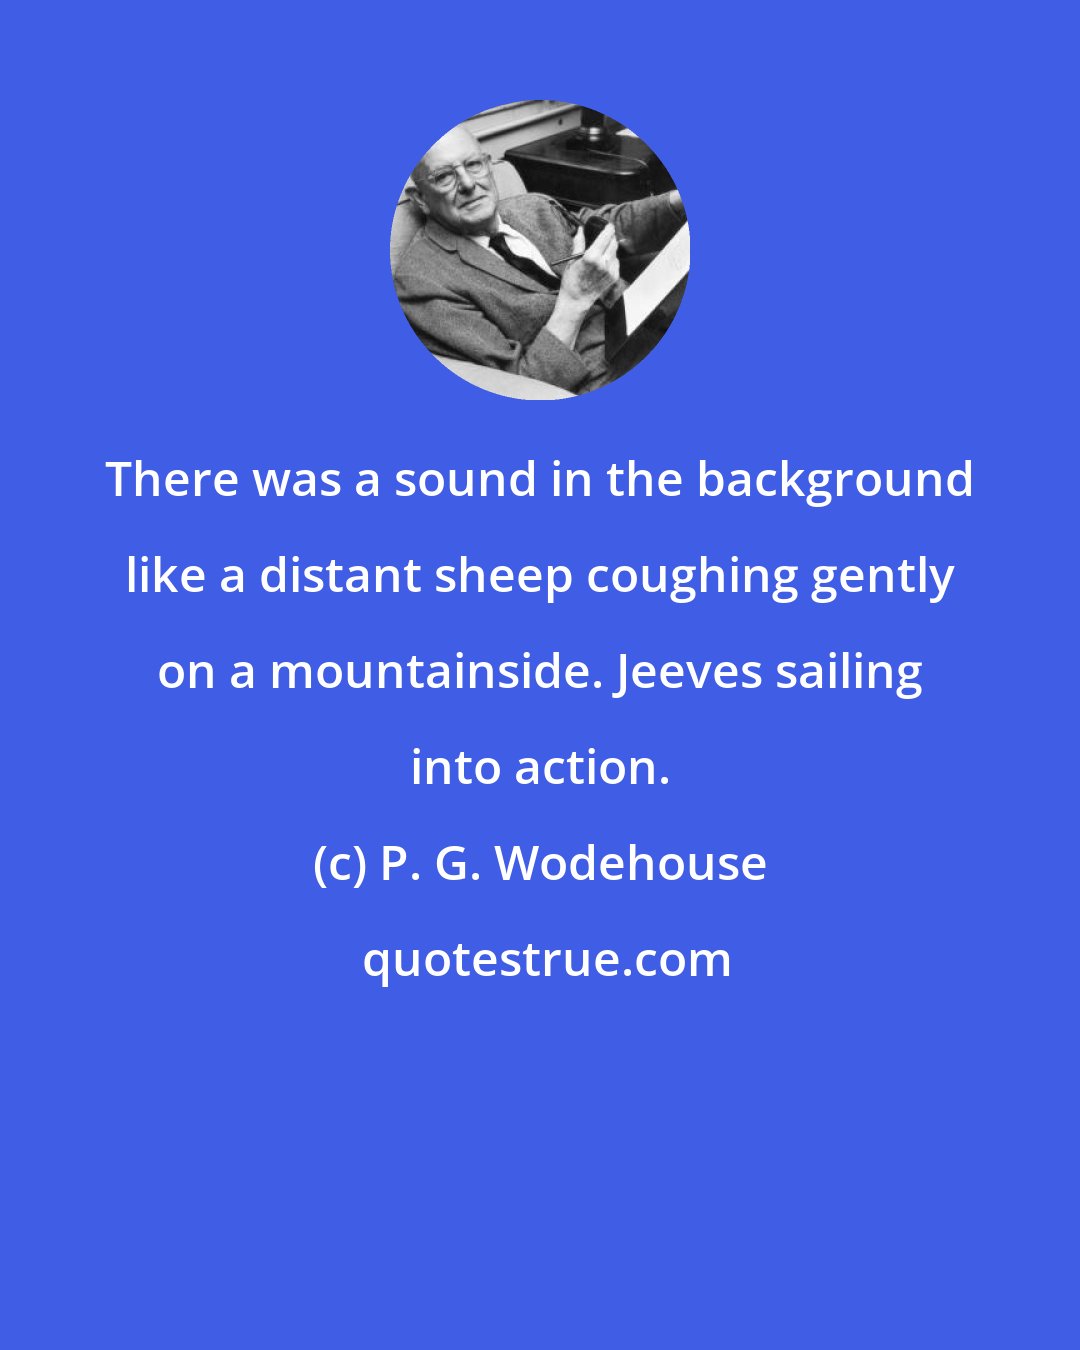 P. G. Wodehouse: There was a sound in the background like a distant sheep coughing gently on a mountainside. Jeeves sailing into action.